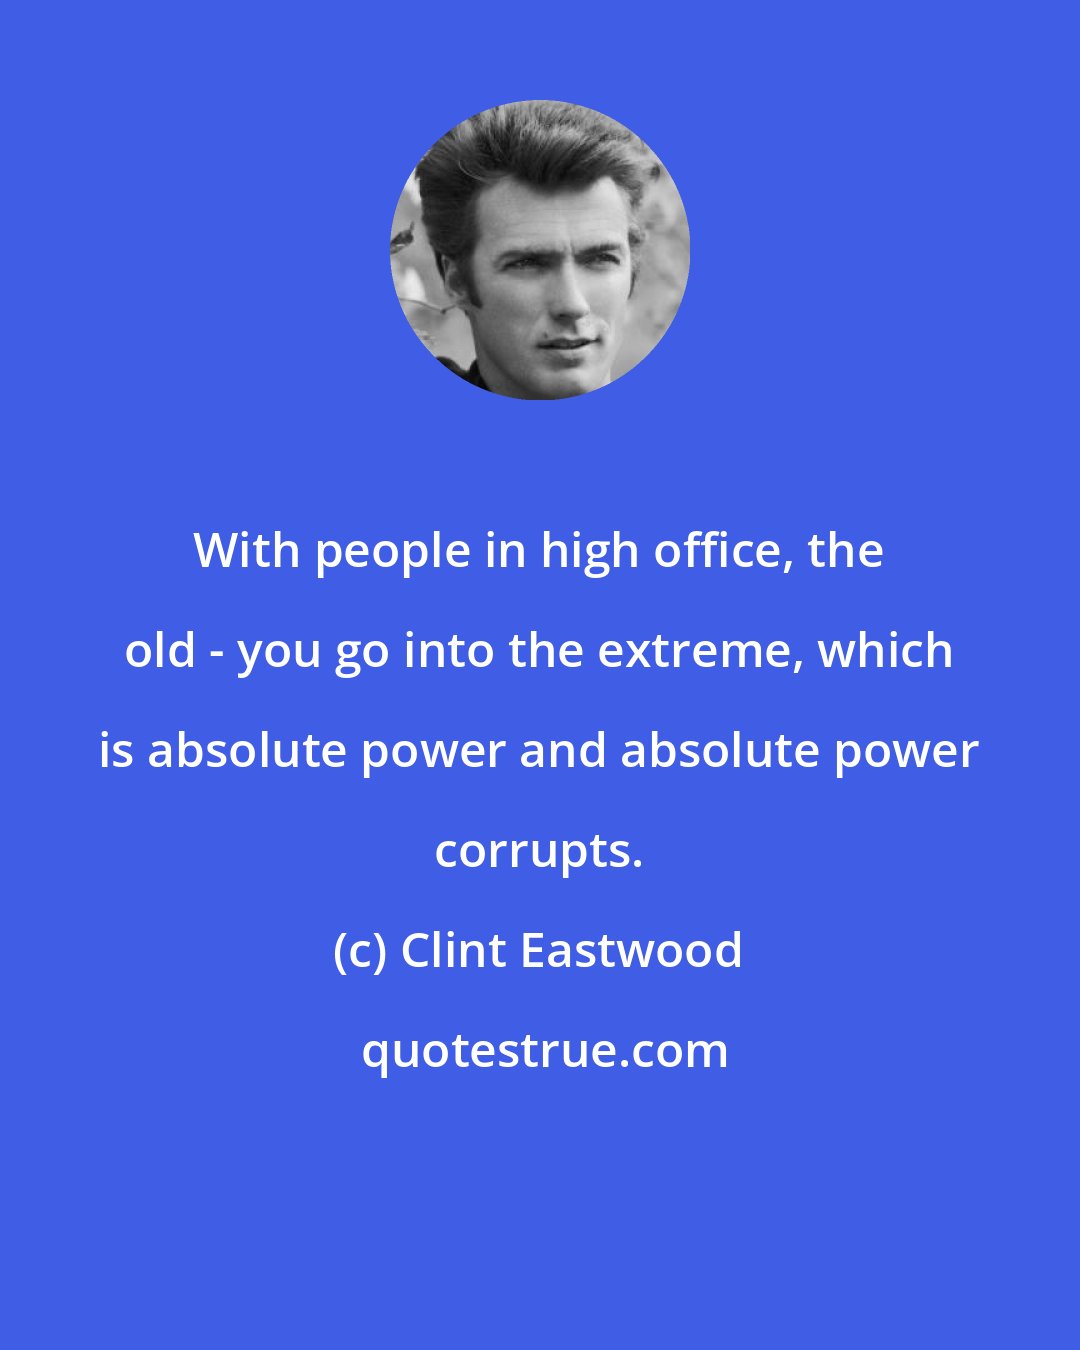 Clint Eastwood: With people in high office, the old - you go into the extreme, which is absolute power and absolute power corrupts.